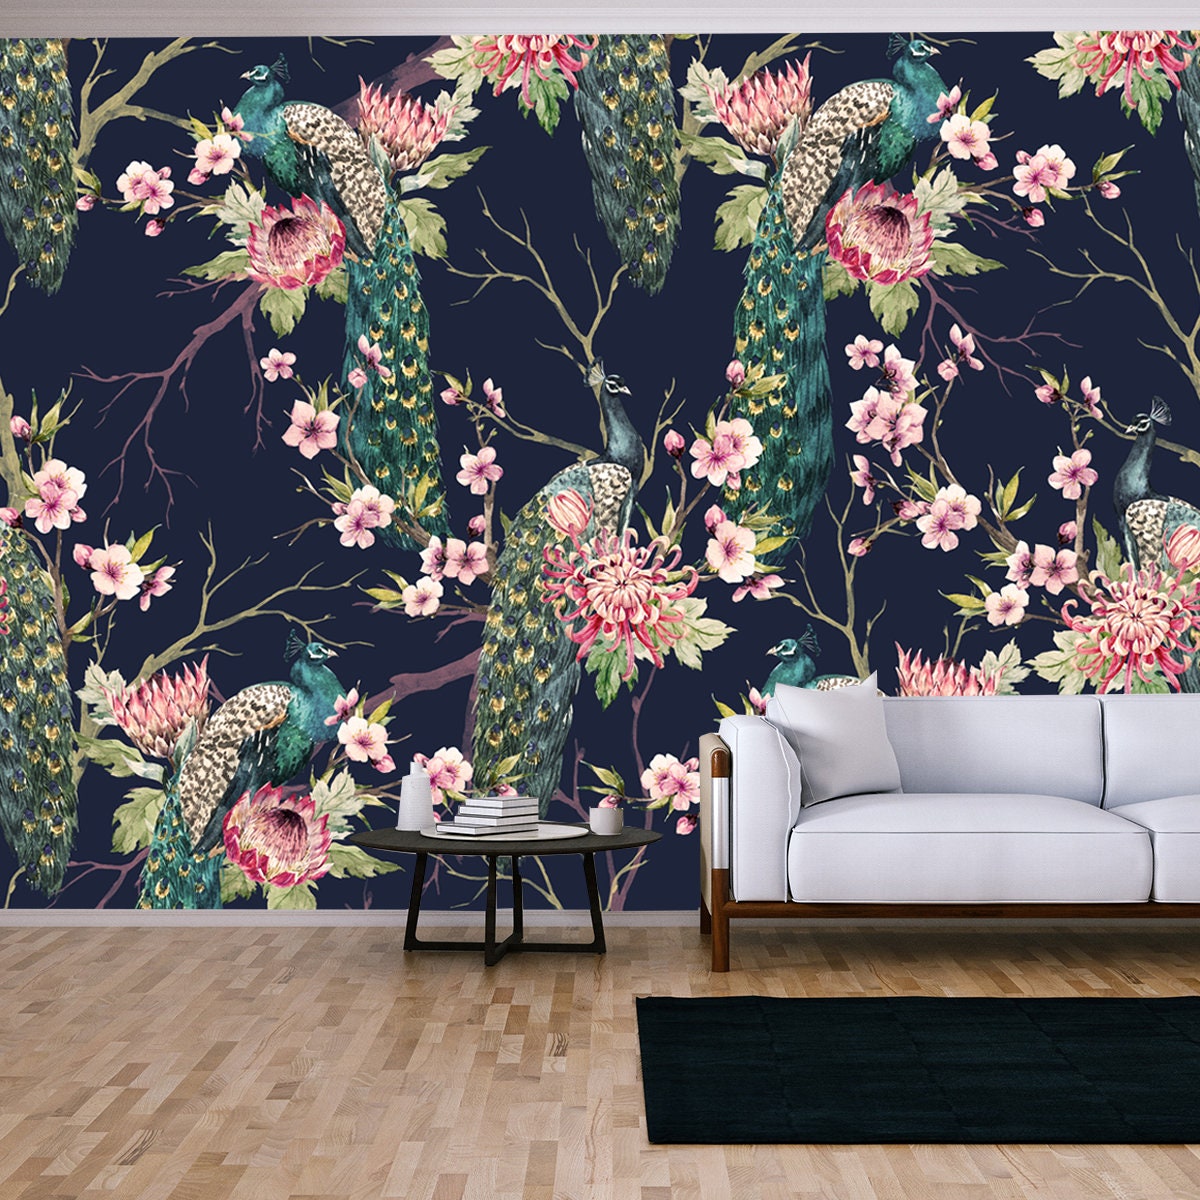 Watercolor Pattern Peacock on a Cherry Tree, Flowering Trees. Protea Flower, Retro Colors Wallpaper Living Room Mural